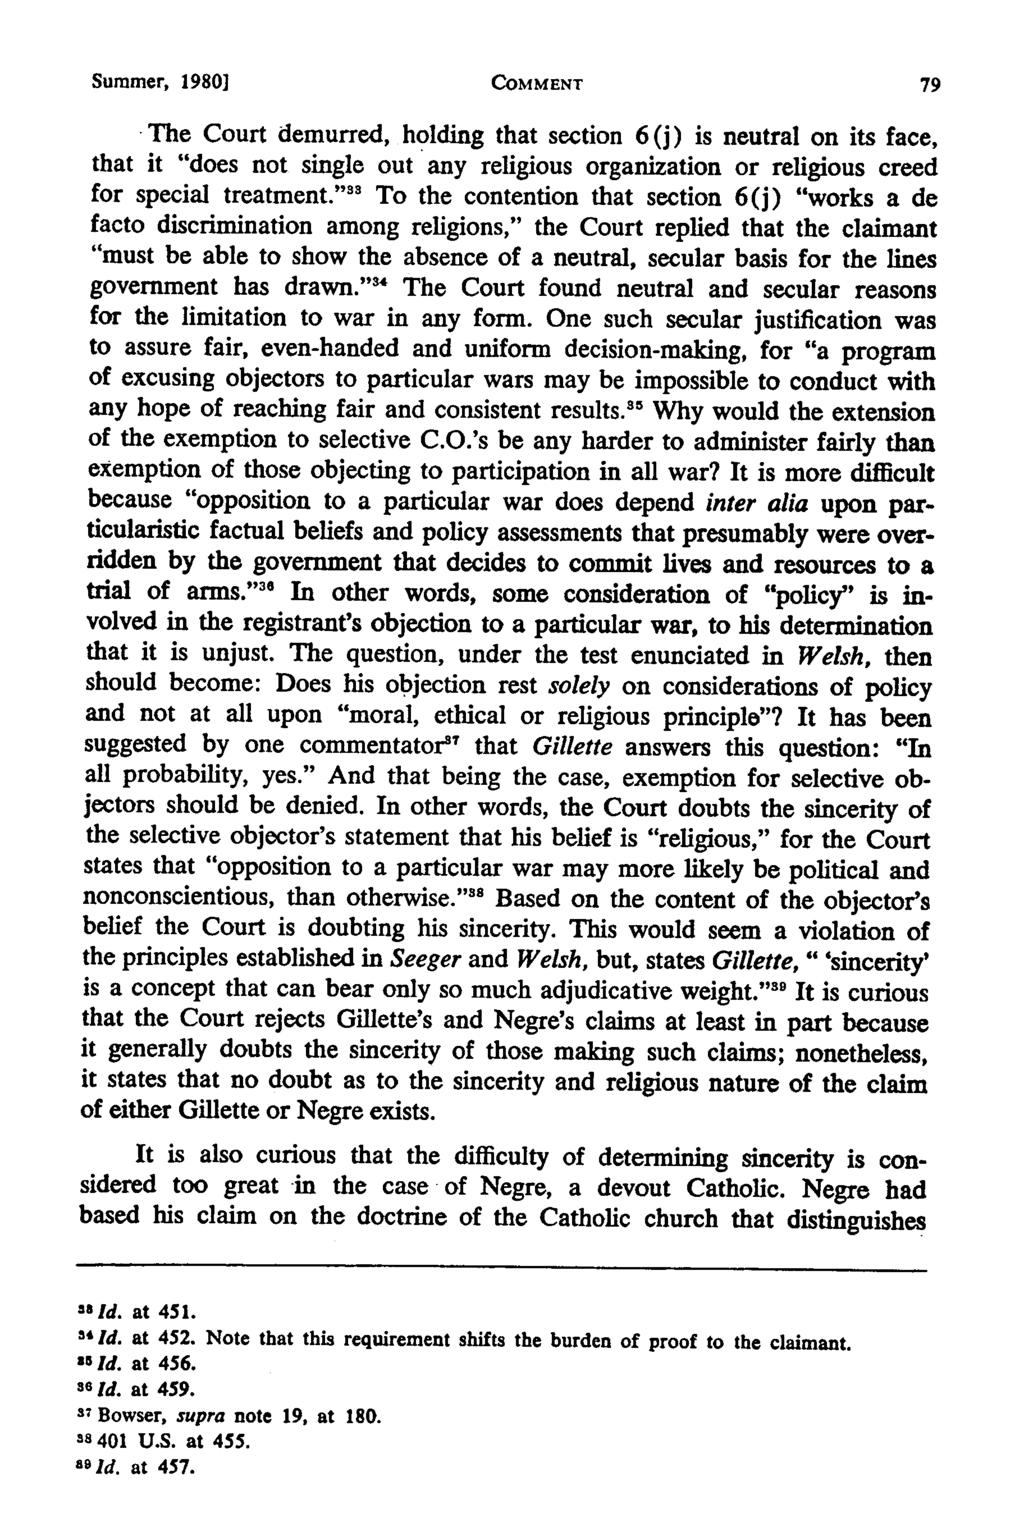 Summer, 1980] Sweeney: Conscientious Objection and the First Amendment COMMENT The Court demurred, holding that section 6 (j) is neutral on its face, that it "does not single out any religious